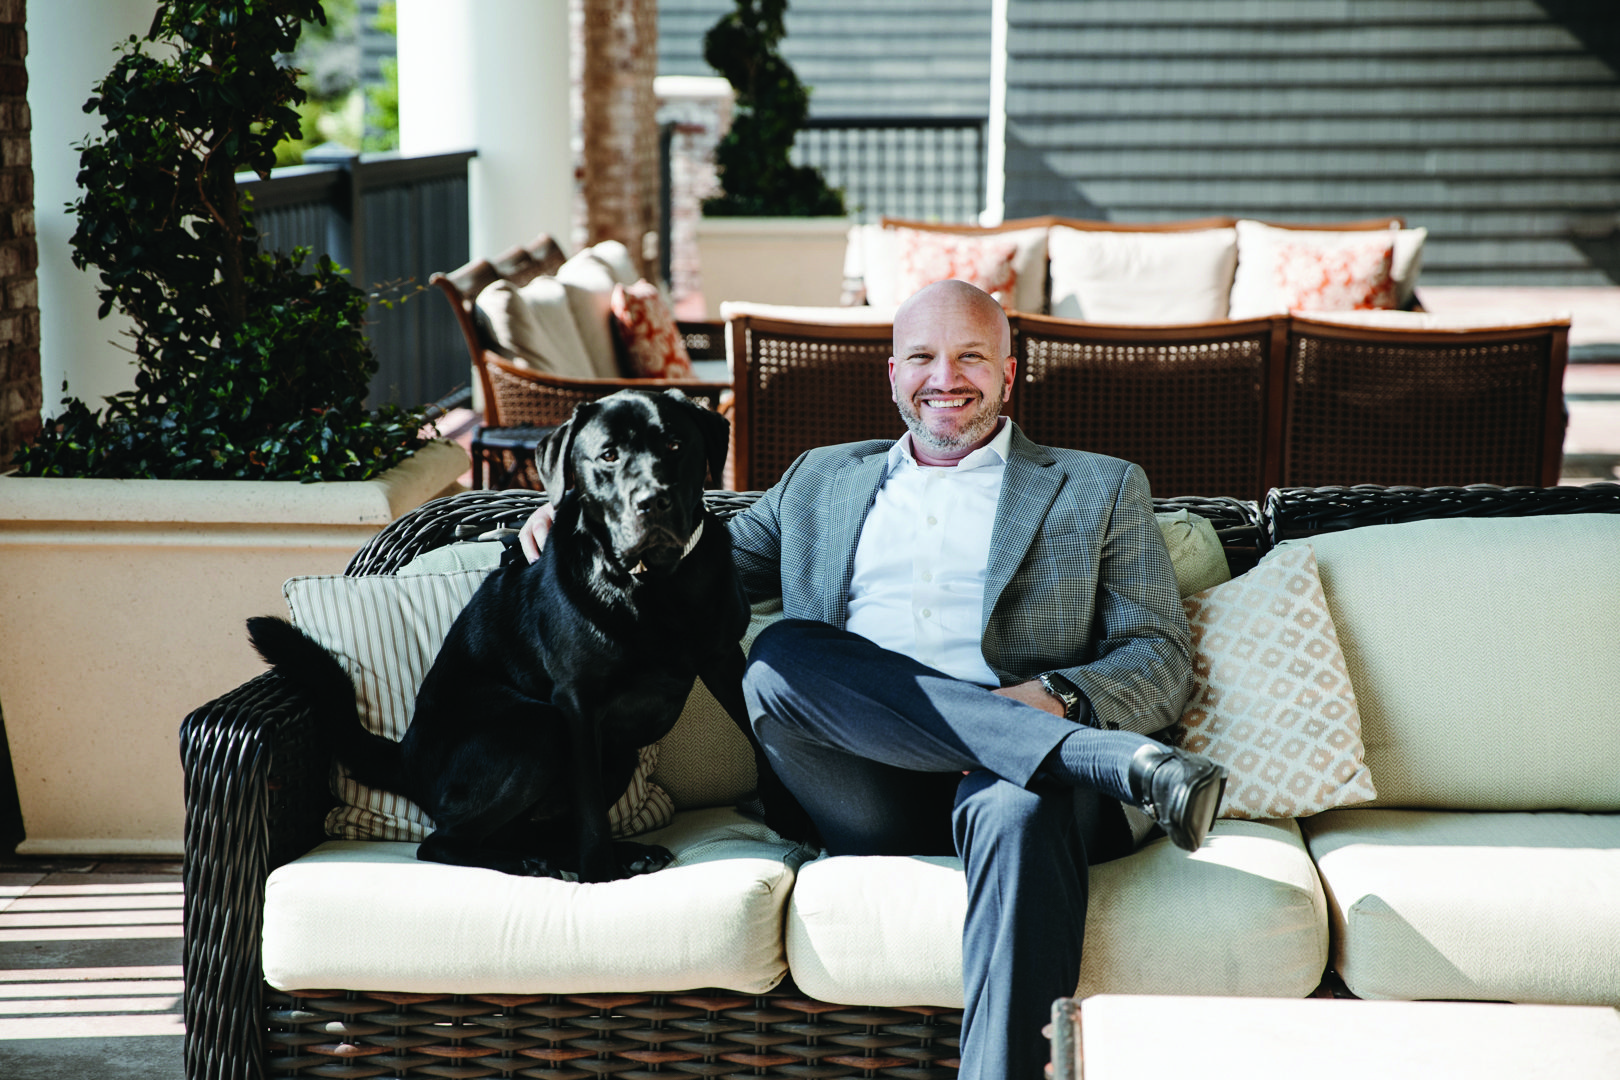 Photograph of Ranger, a black Labrador, and David Mars, General Manager of the Henderson in Destin, FL